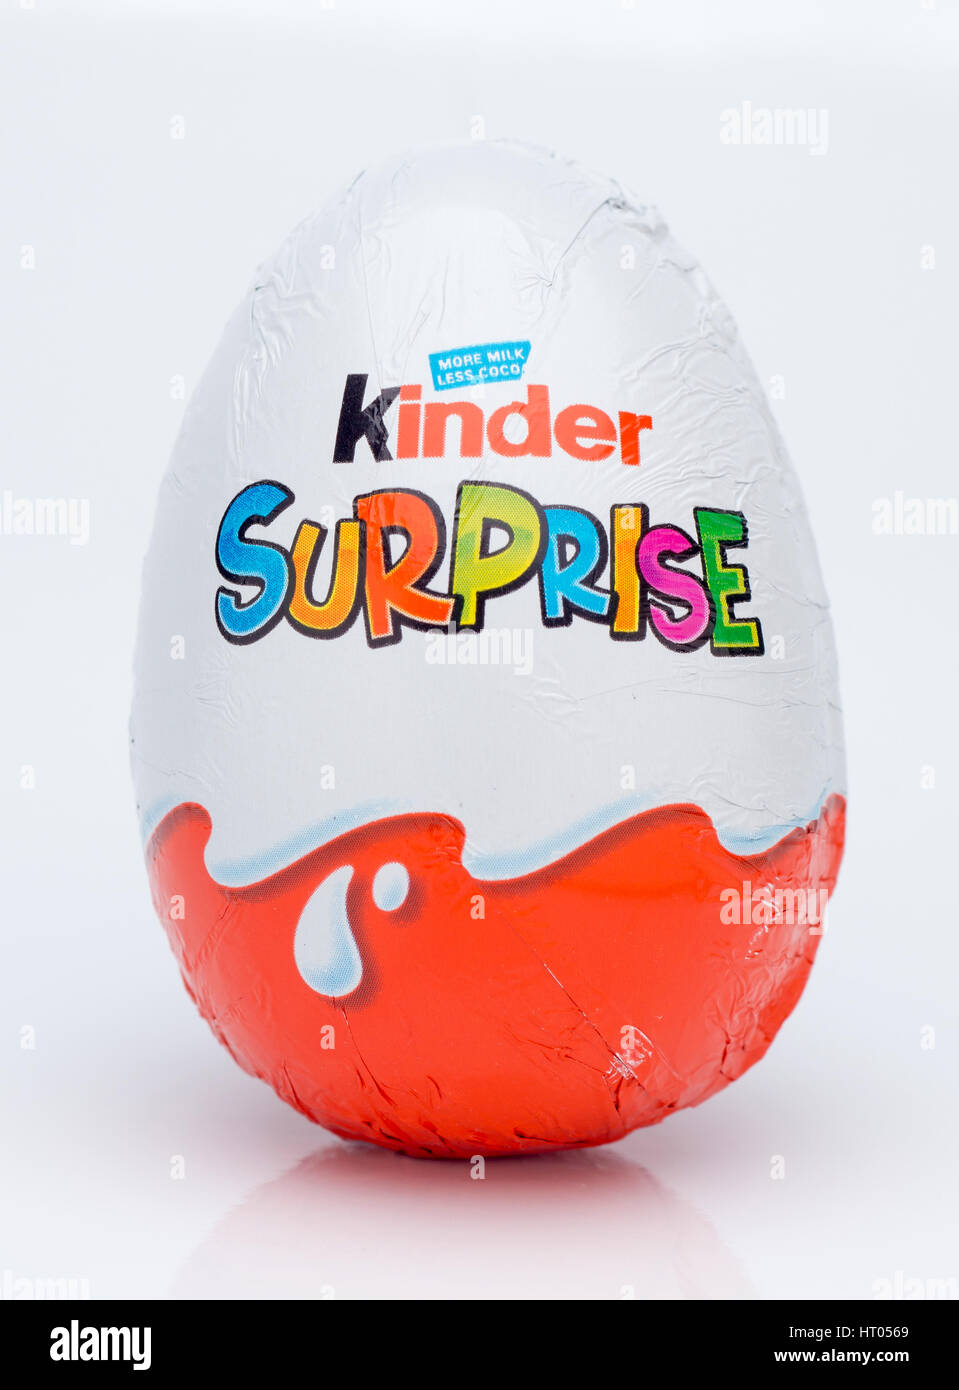 Kinder Suprise or Kinder Egg is a chocolate egg with a toy inside, manufactured by Italian company Ferrero since 1974. Stock Photo